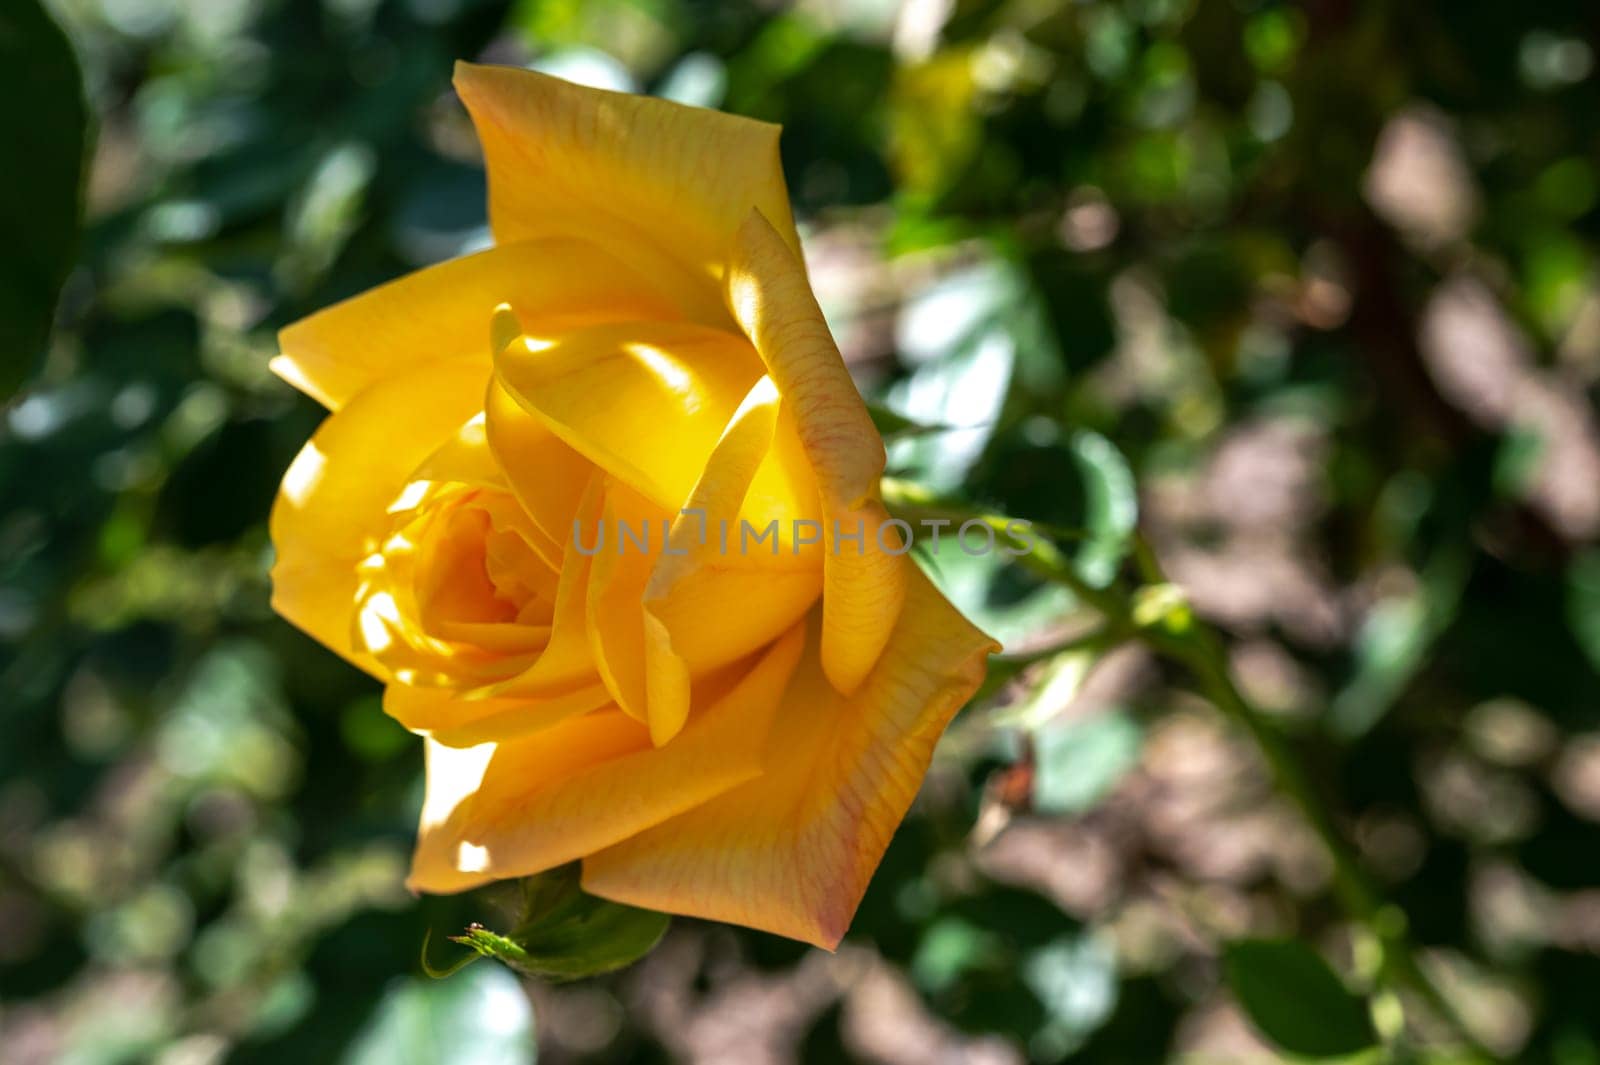 Beautiful Blooming yellow rose in a garden on a green leaves background